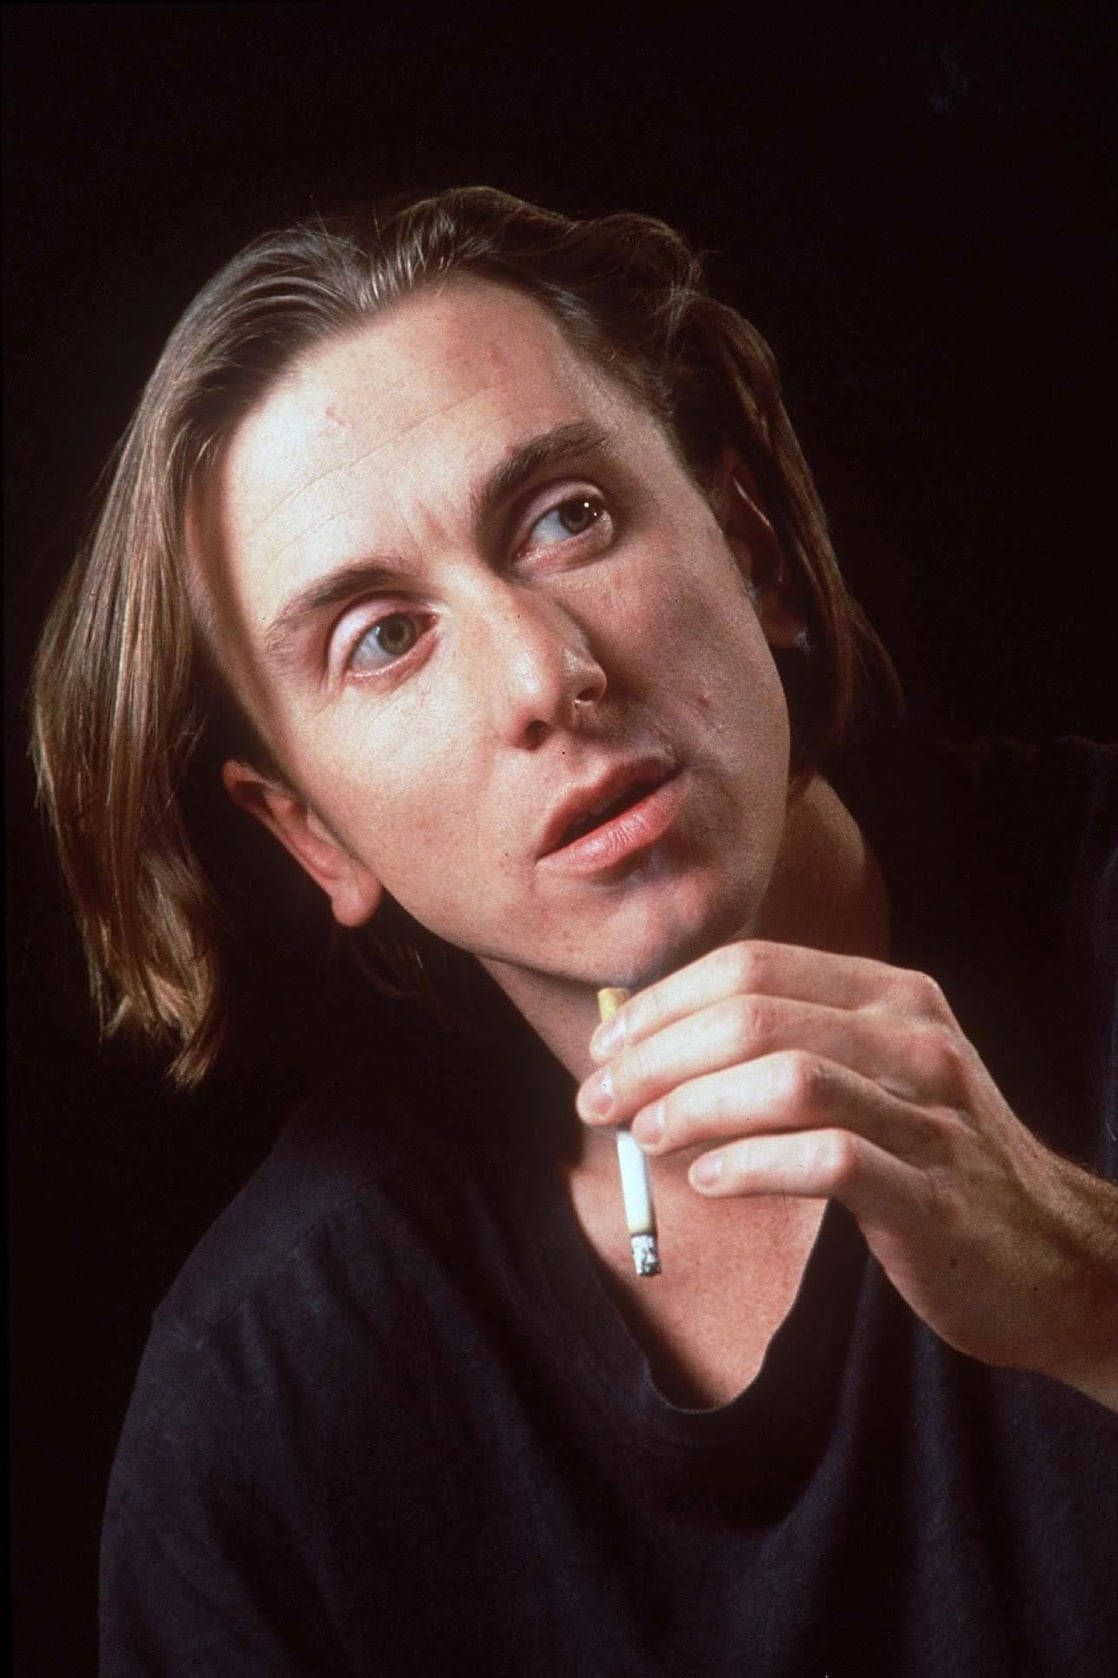 Tim Roth Young Actor Long Brown Hair Look Wallpaper